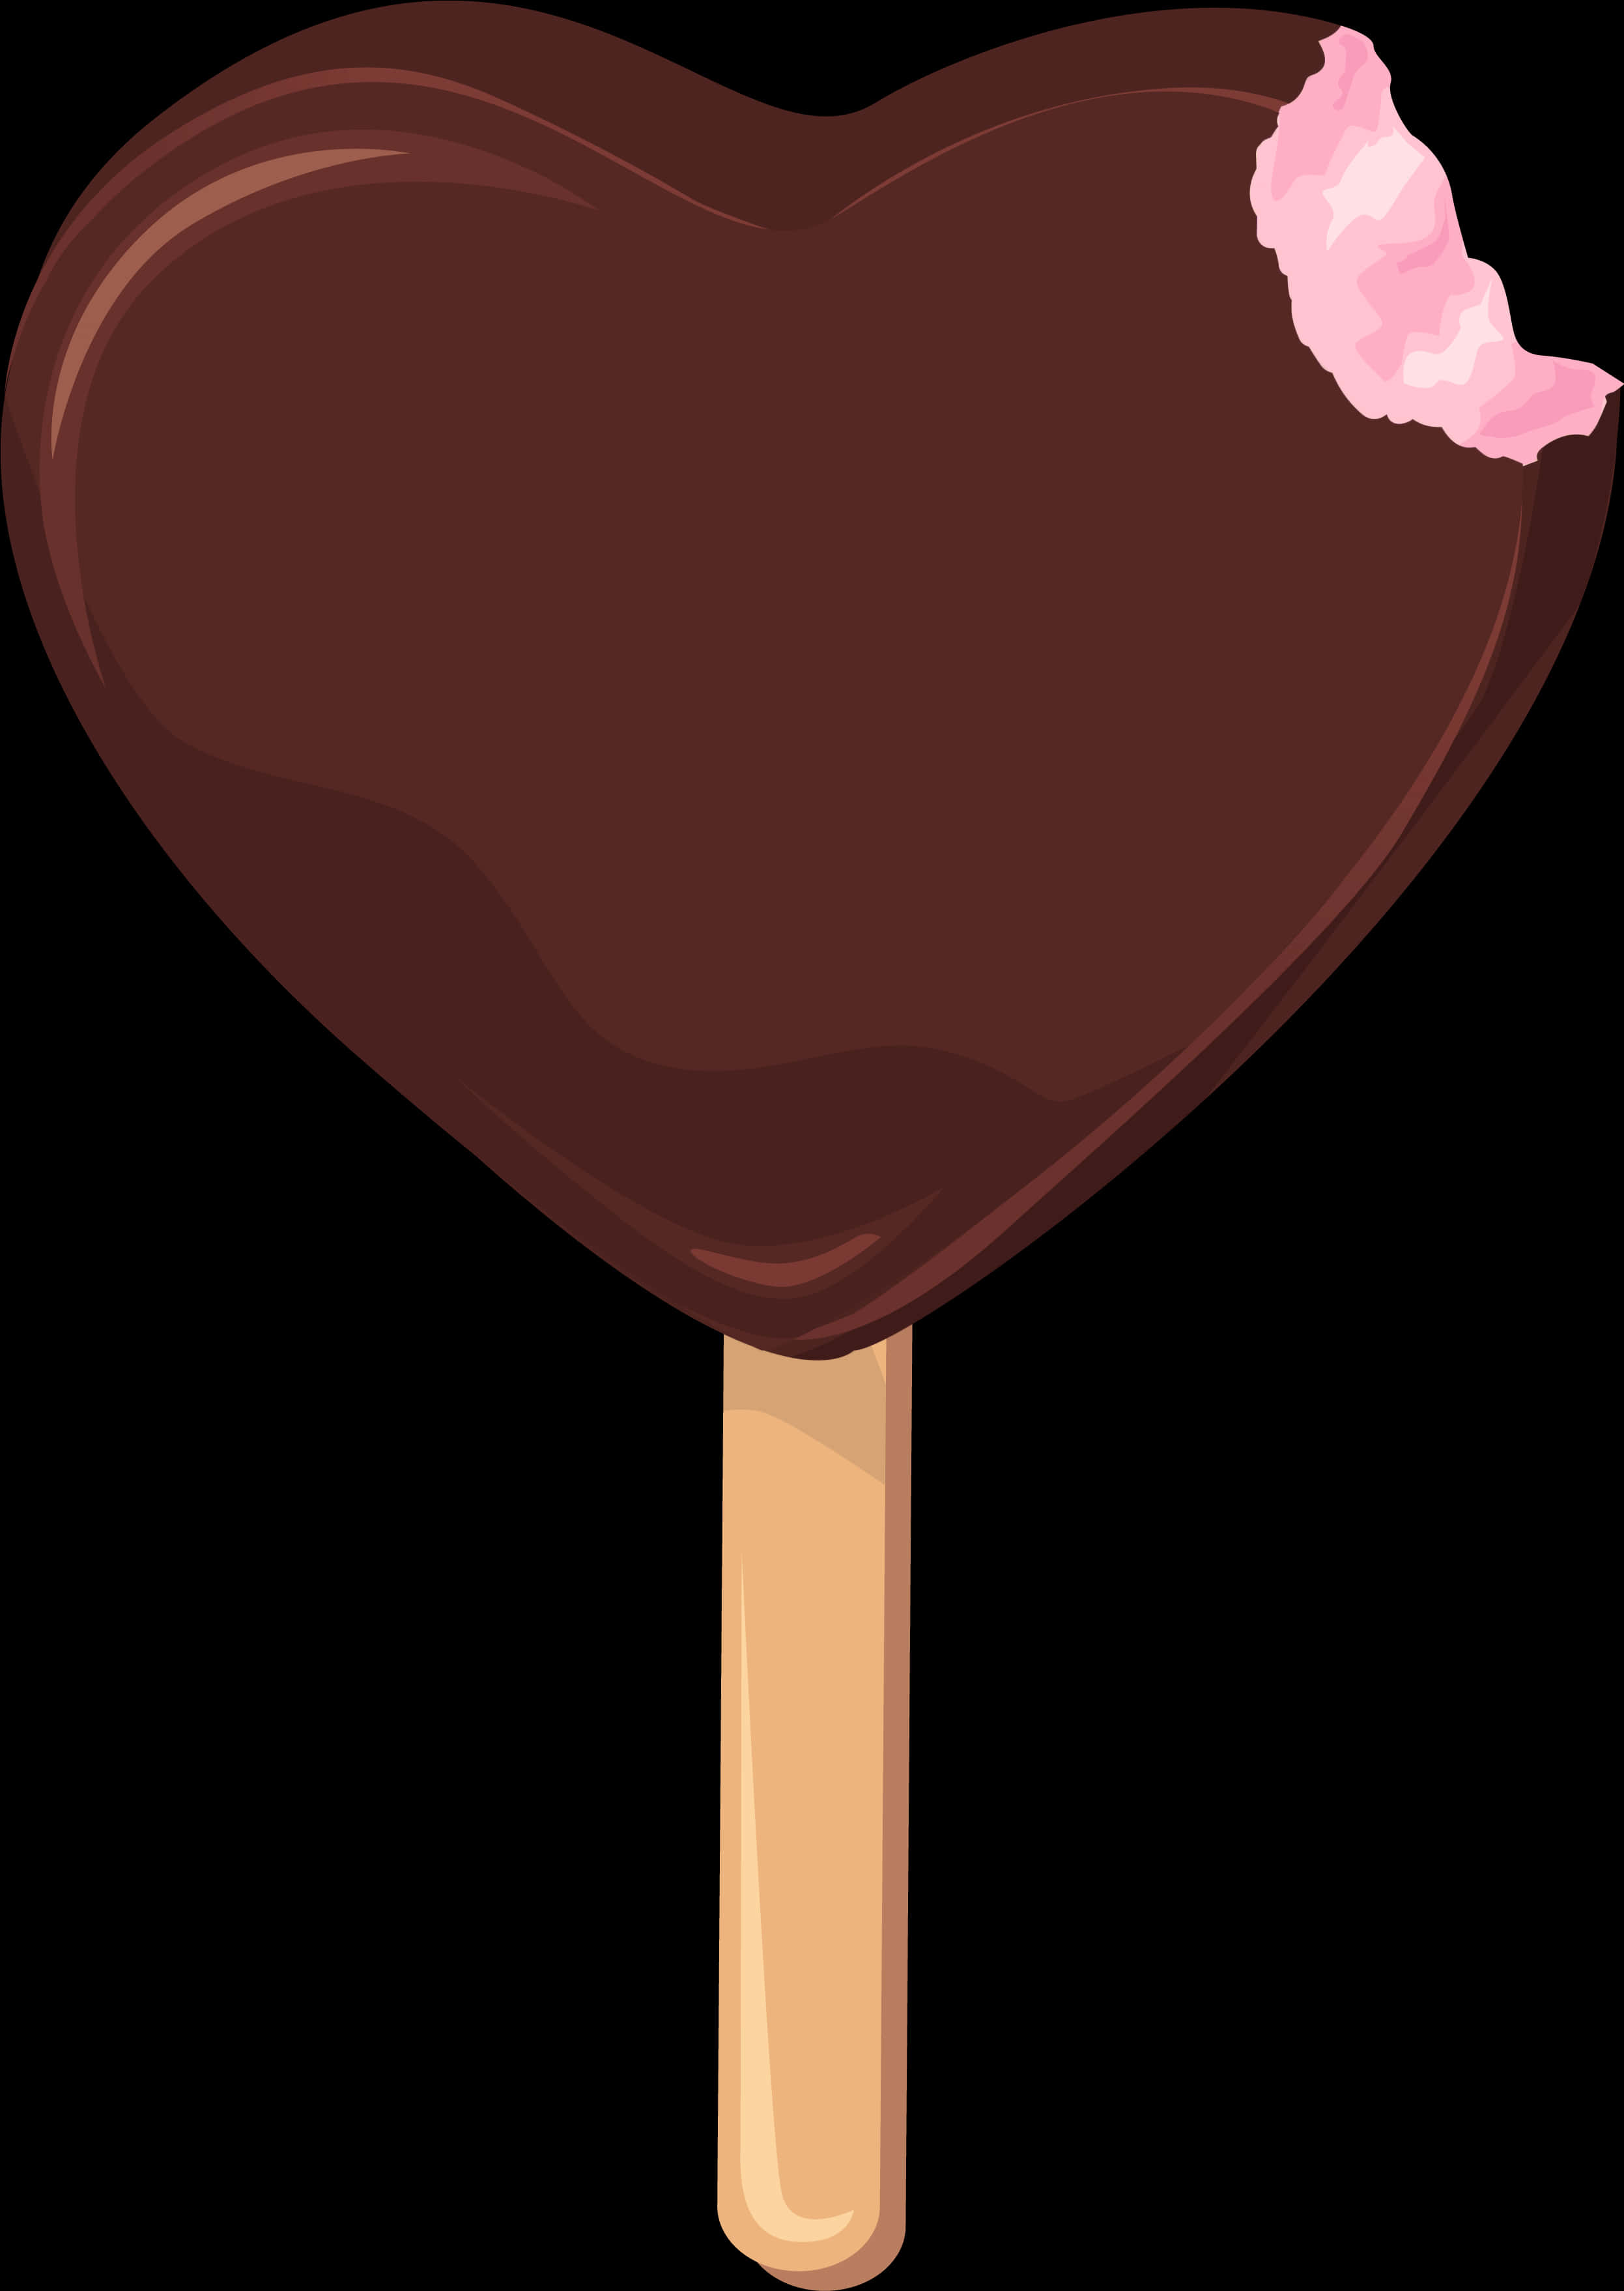 A Chocolate Covered Ice Cream On A Stick